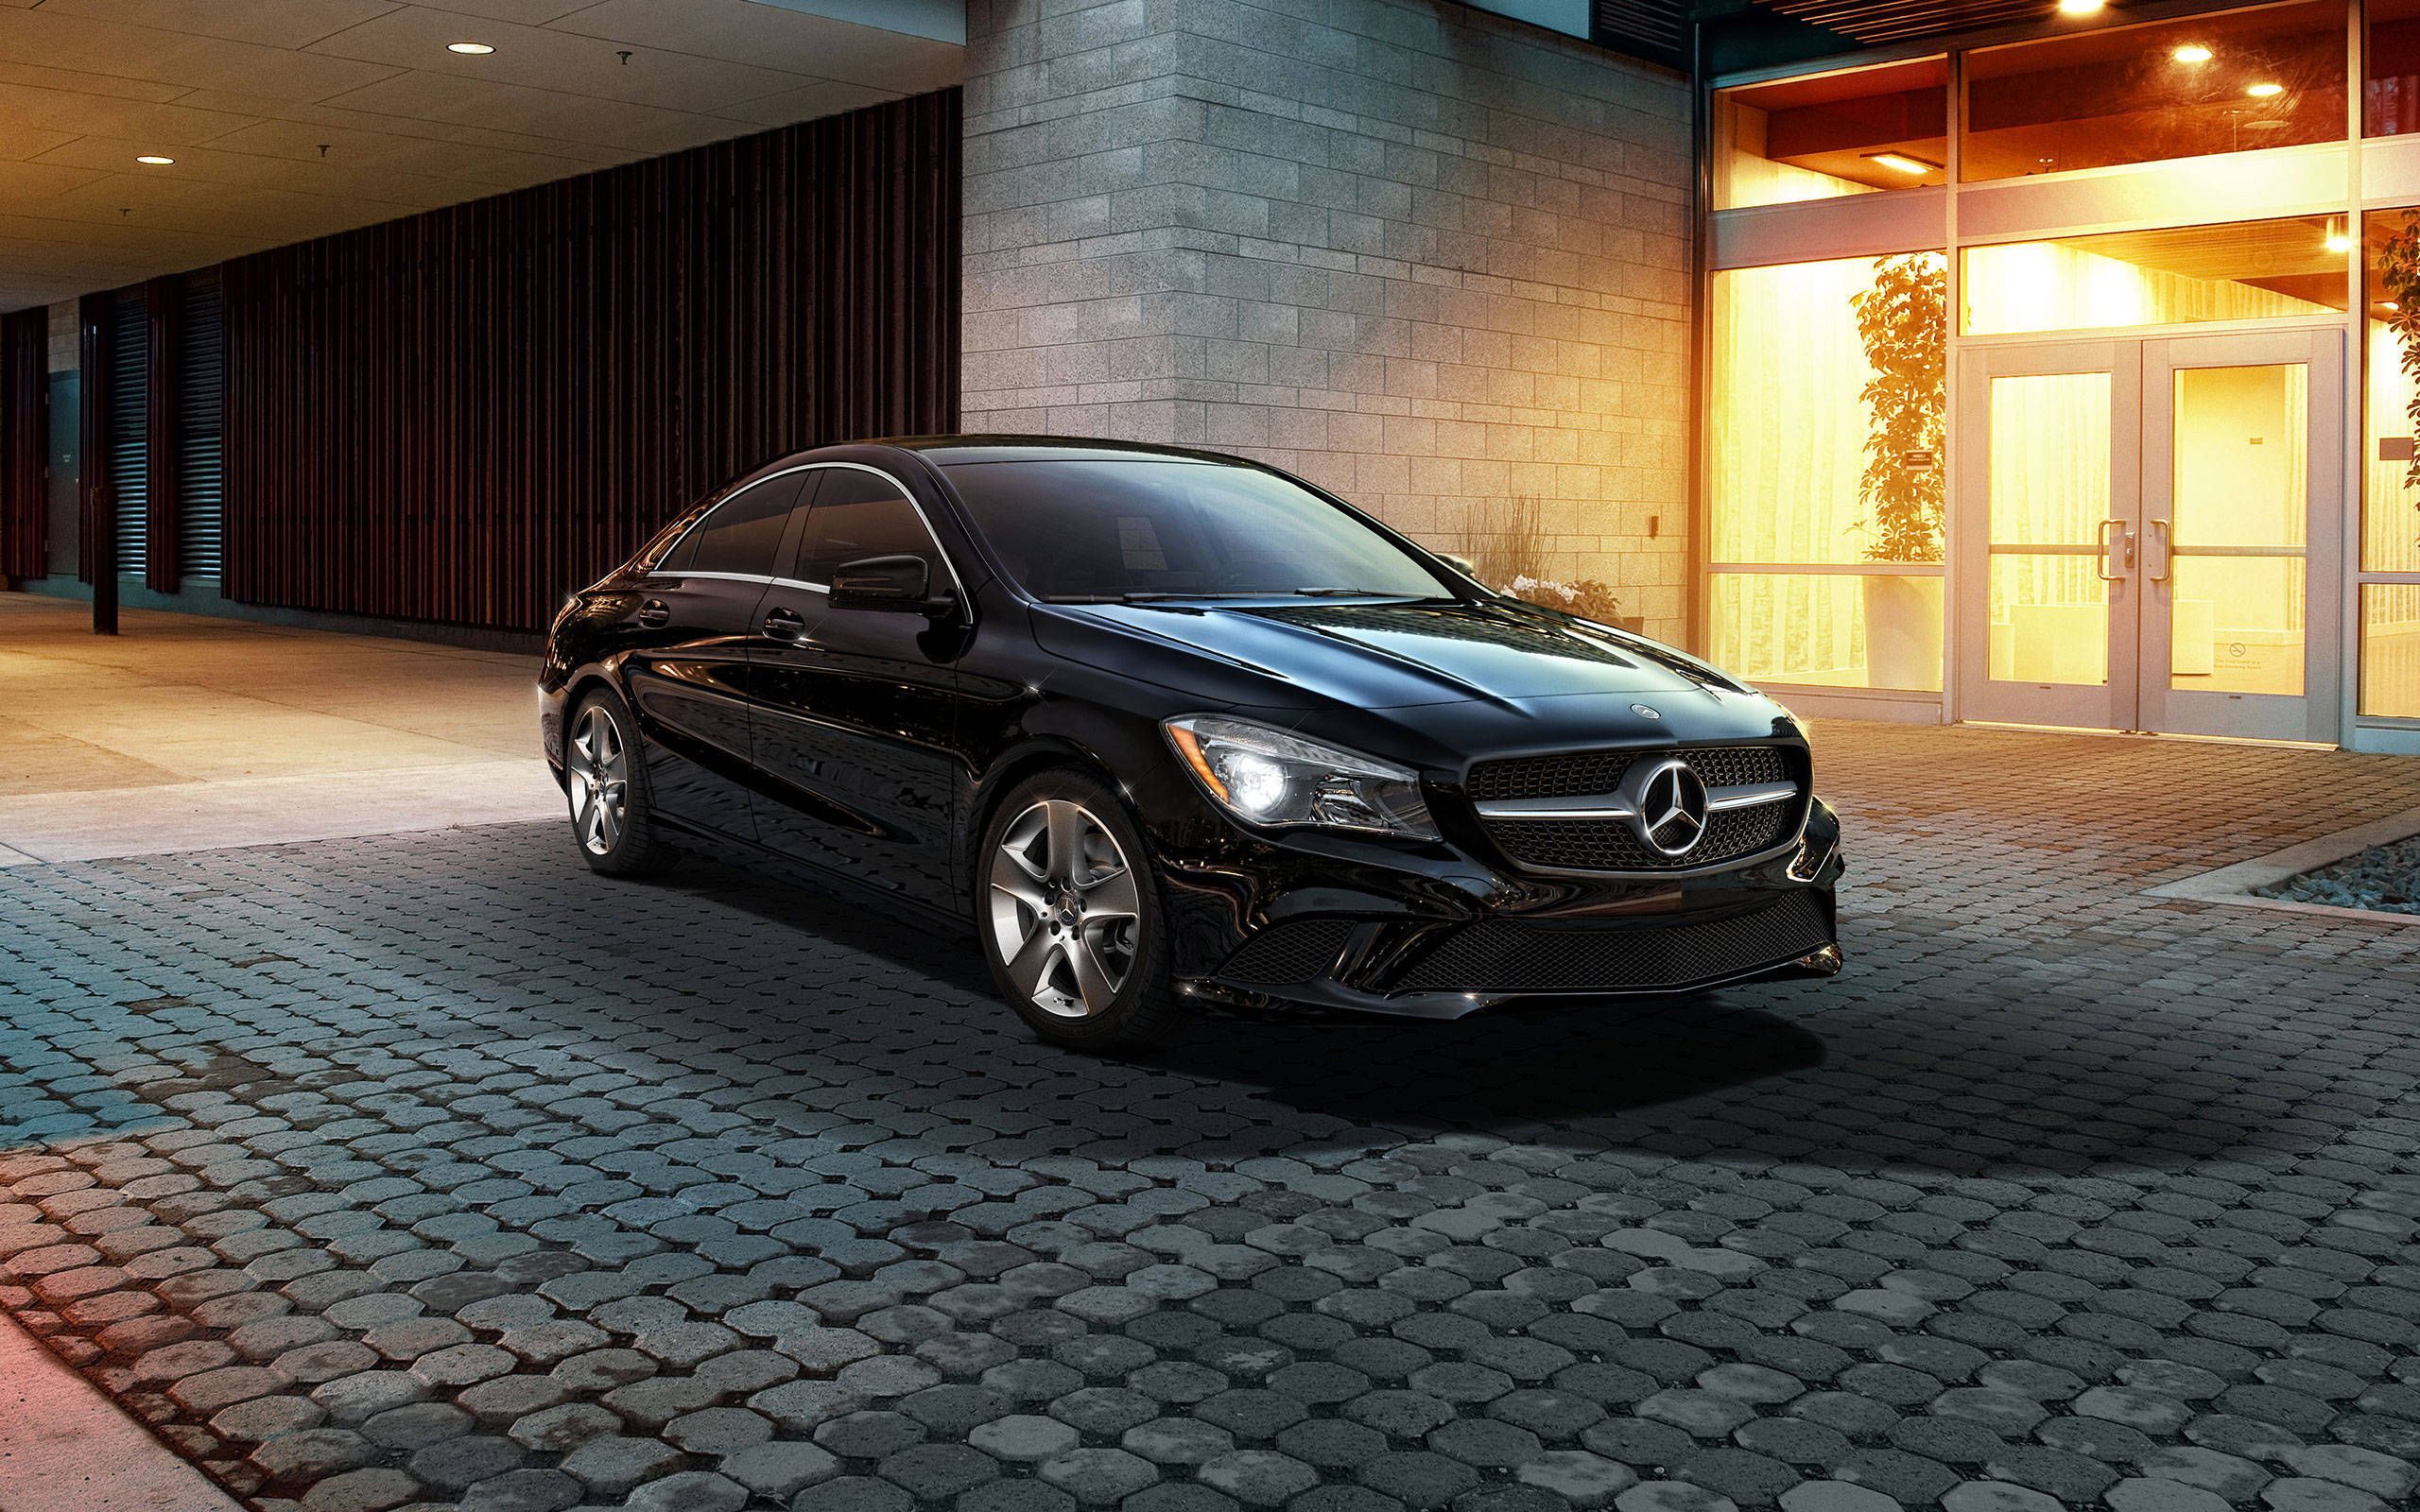 2015 Mercedes-Benz CLA250 4Matic review notes: premium, luxury or neither?